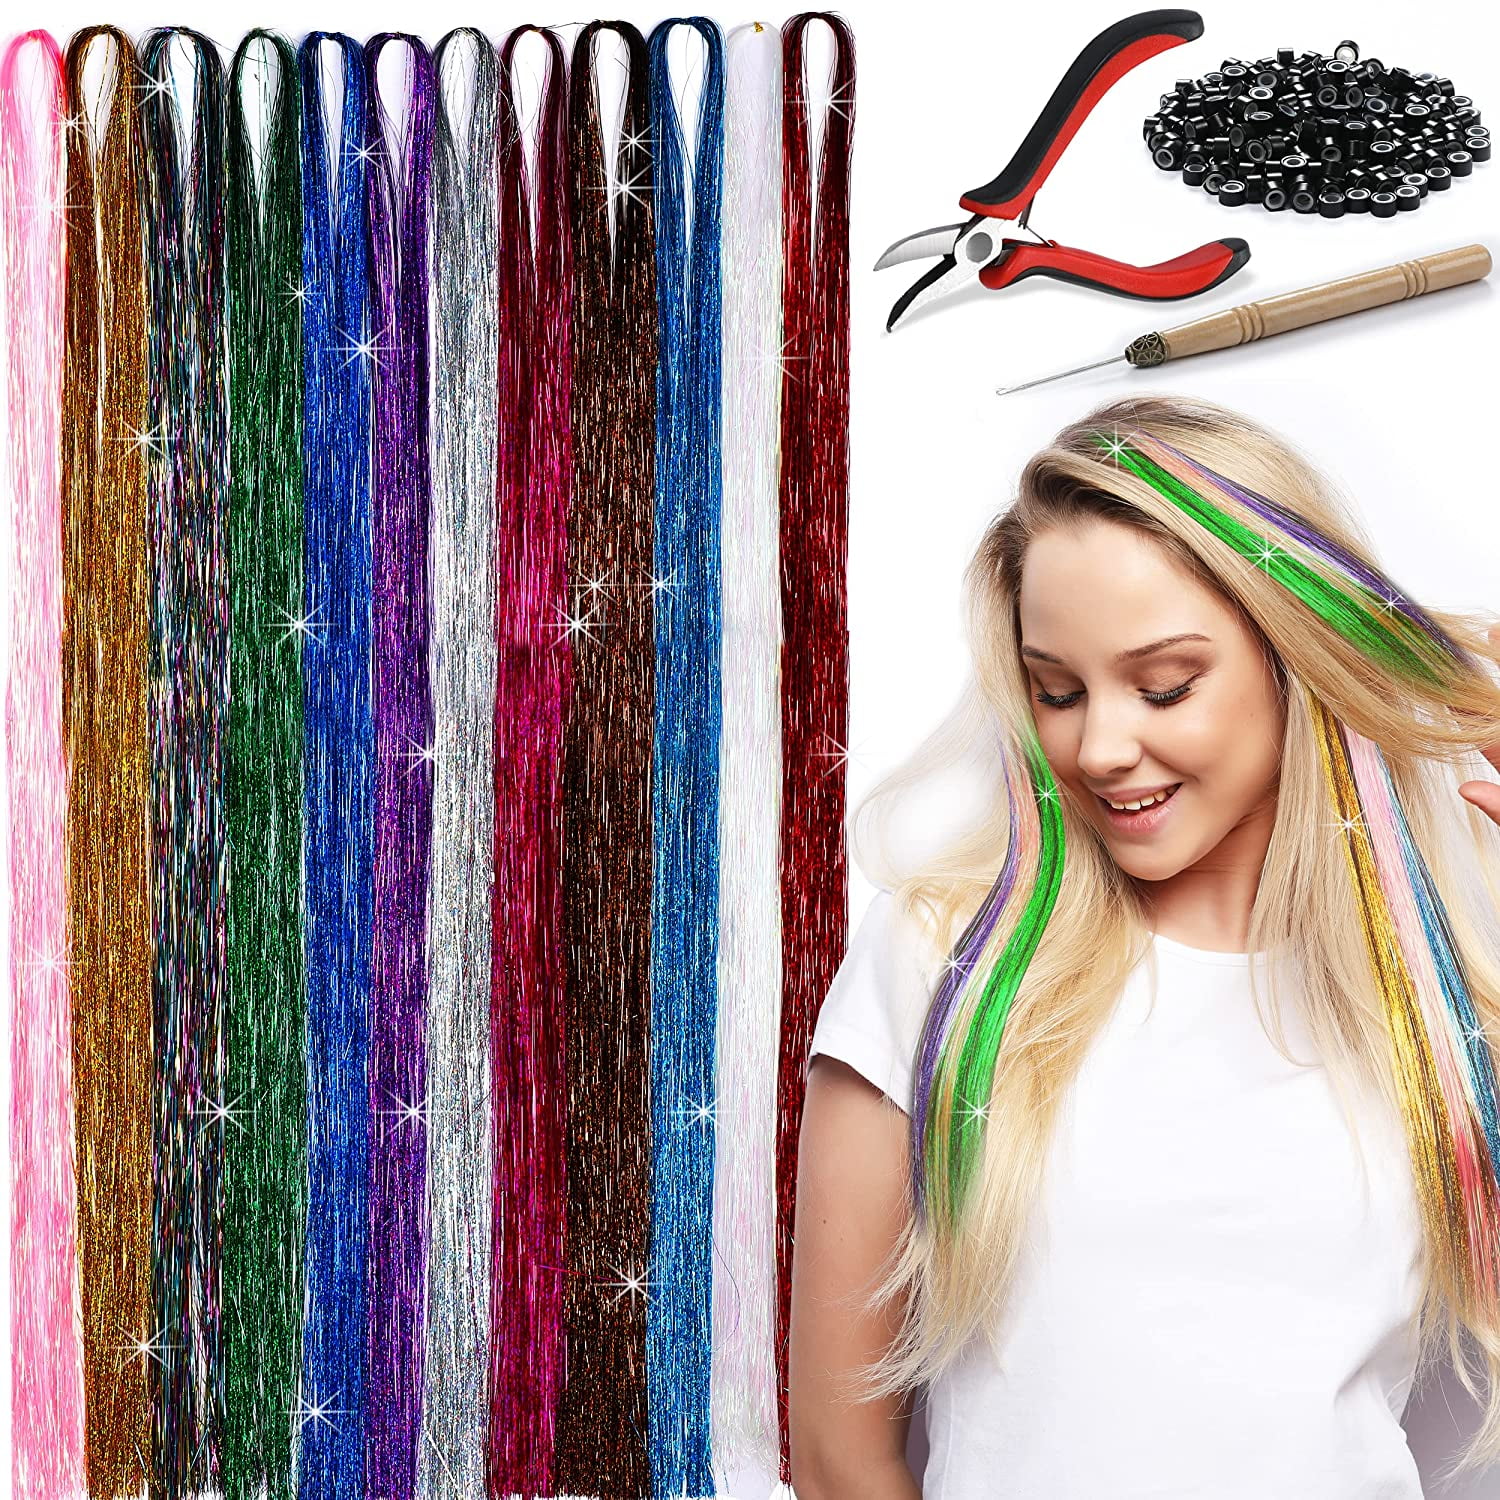 Hair Extension Beads | Skinny Size